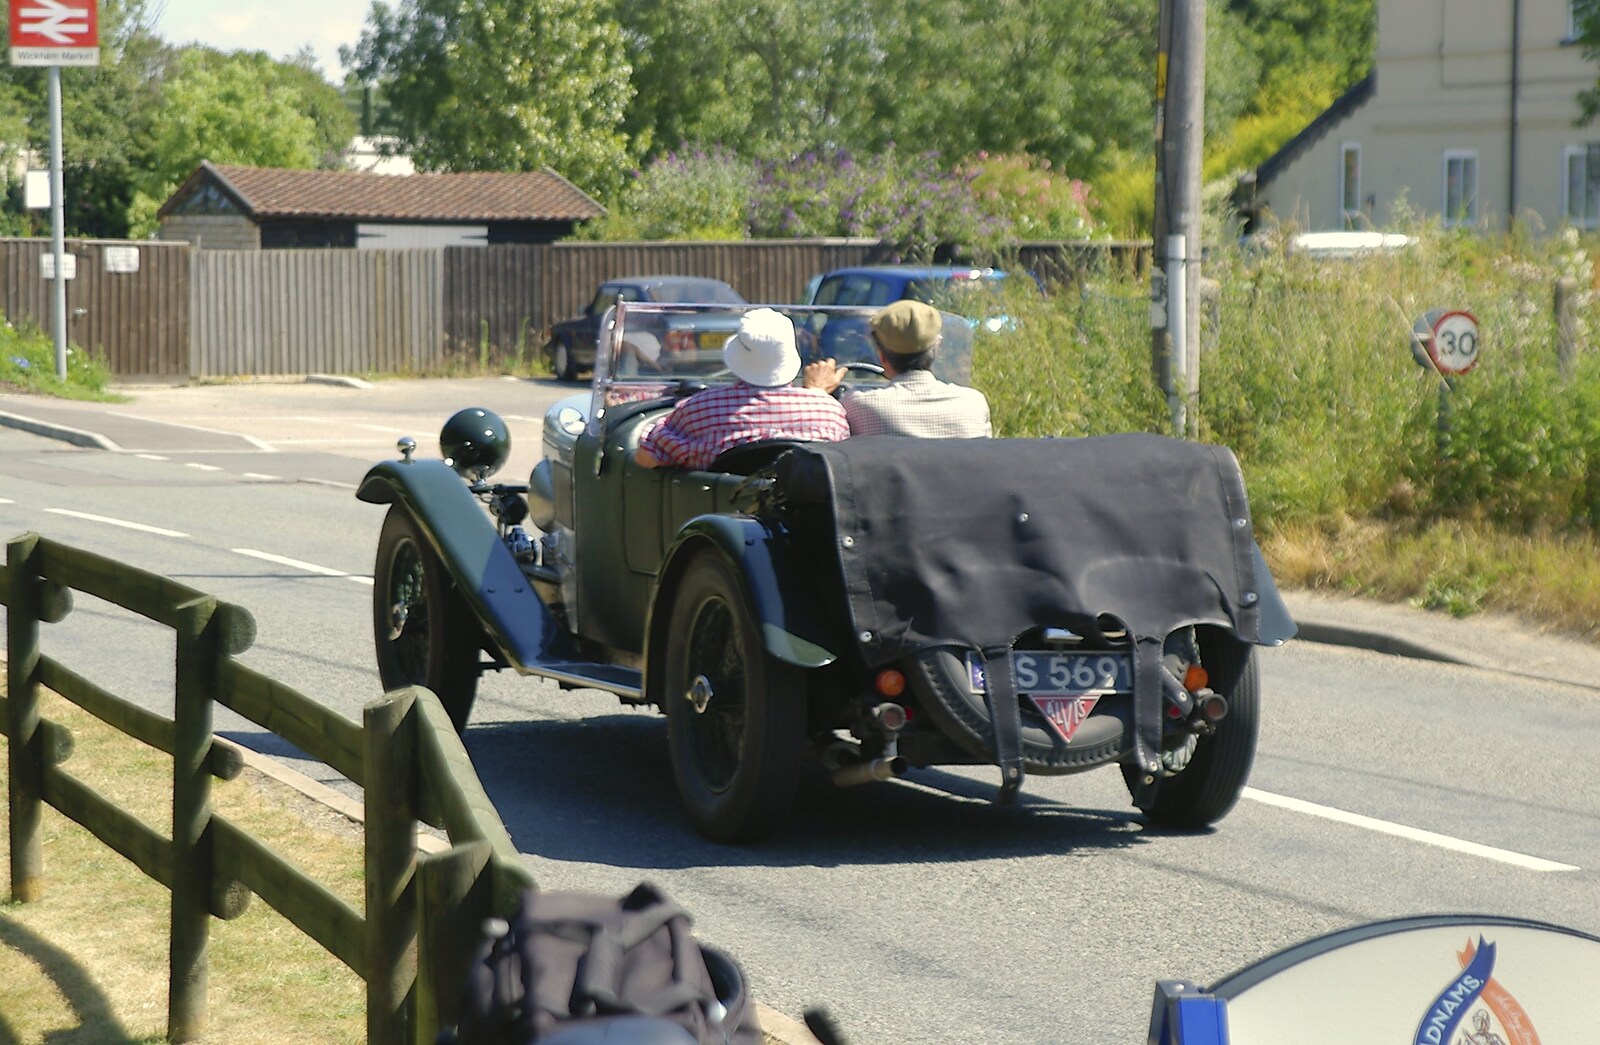 A Morgan or something drives past from The BSCC Charity Bike Ride, Orford, Suffolk - 15th July 2006